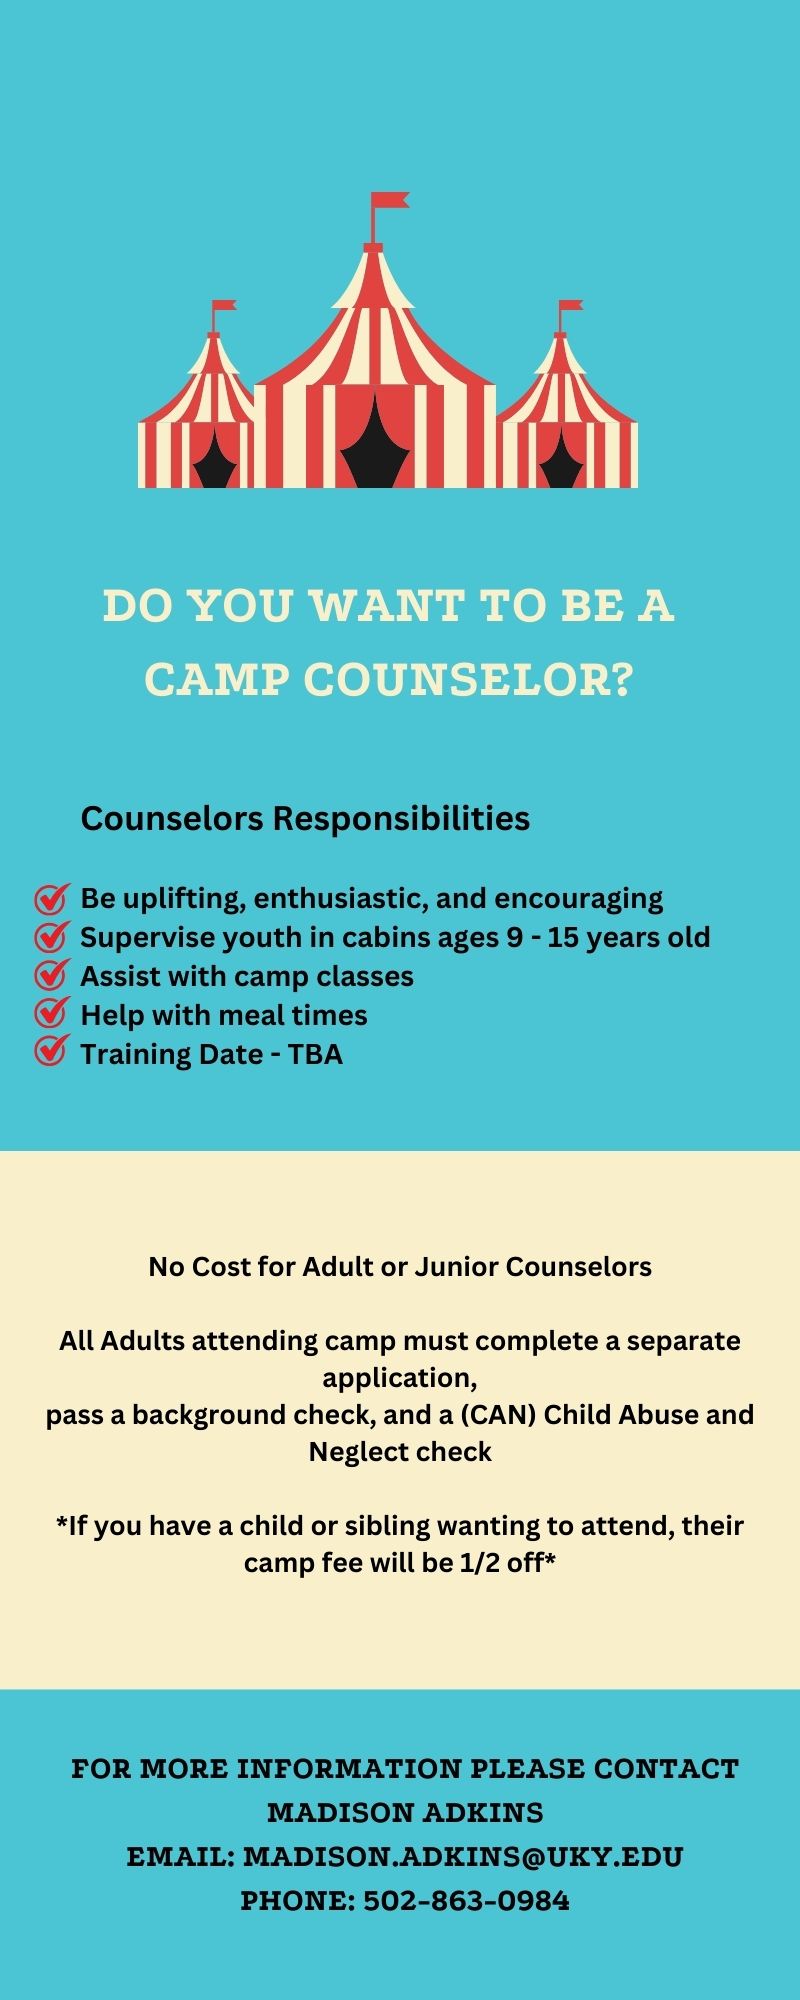 Want to be a camp counselor?